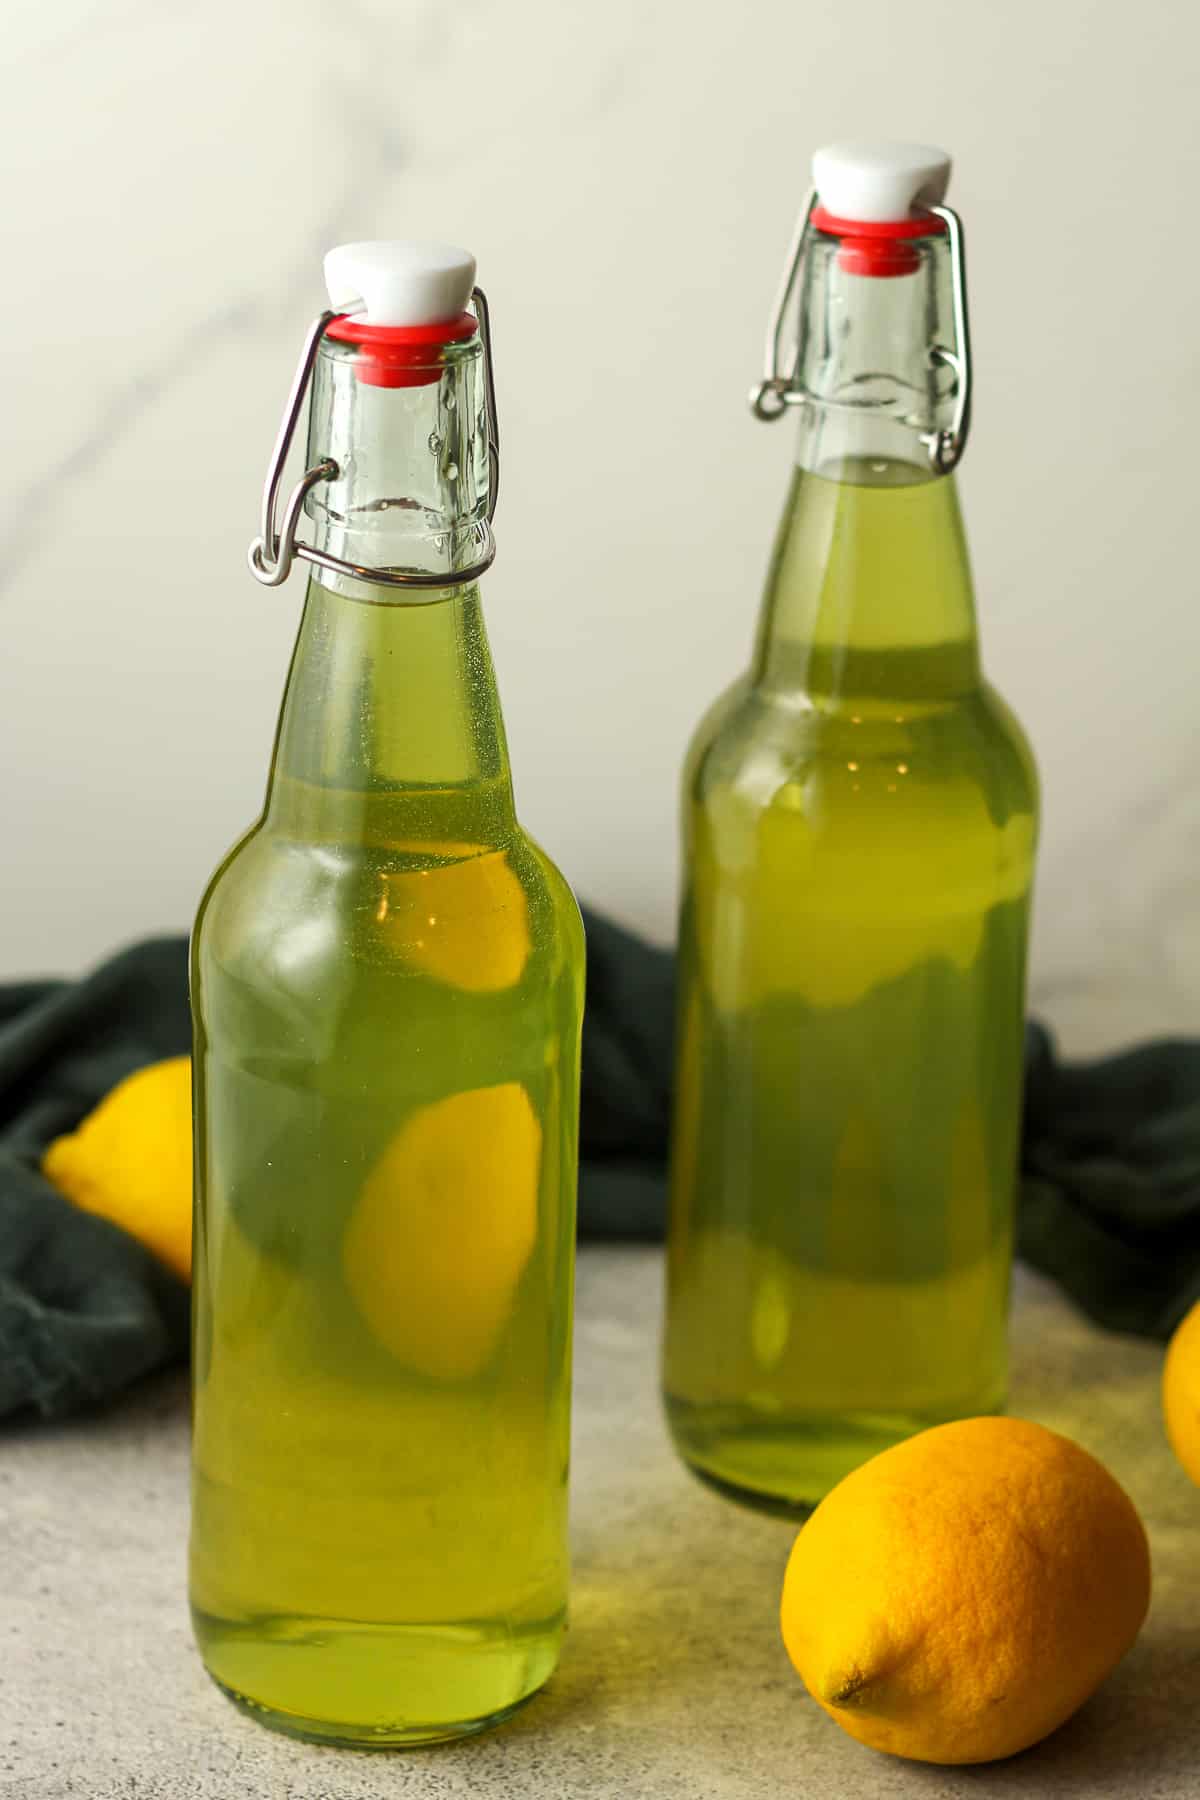 Side view of two bottles of homemade limoncello.